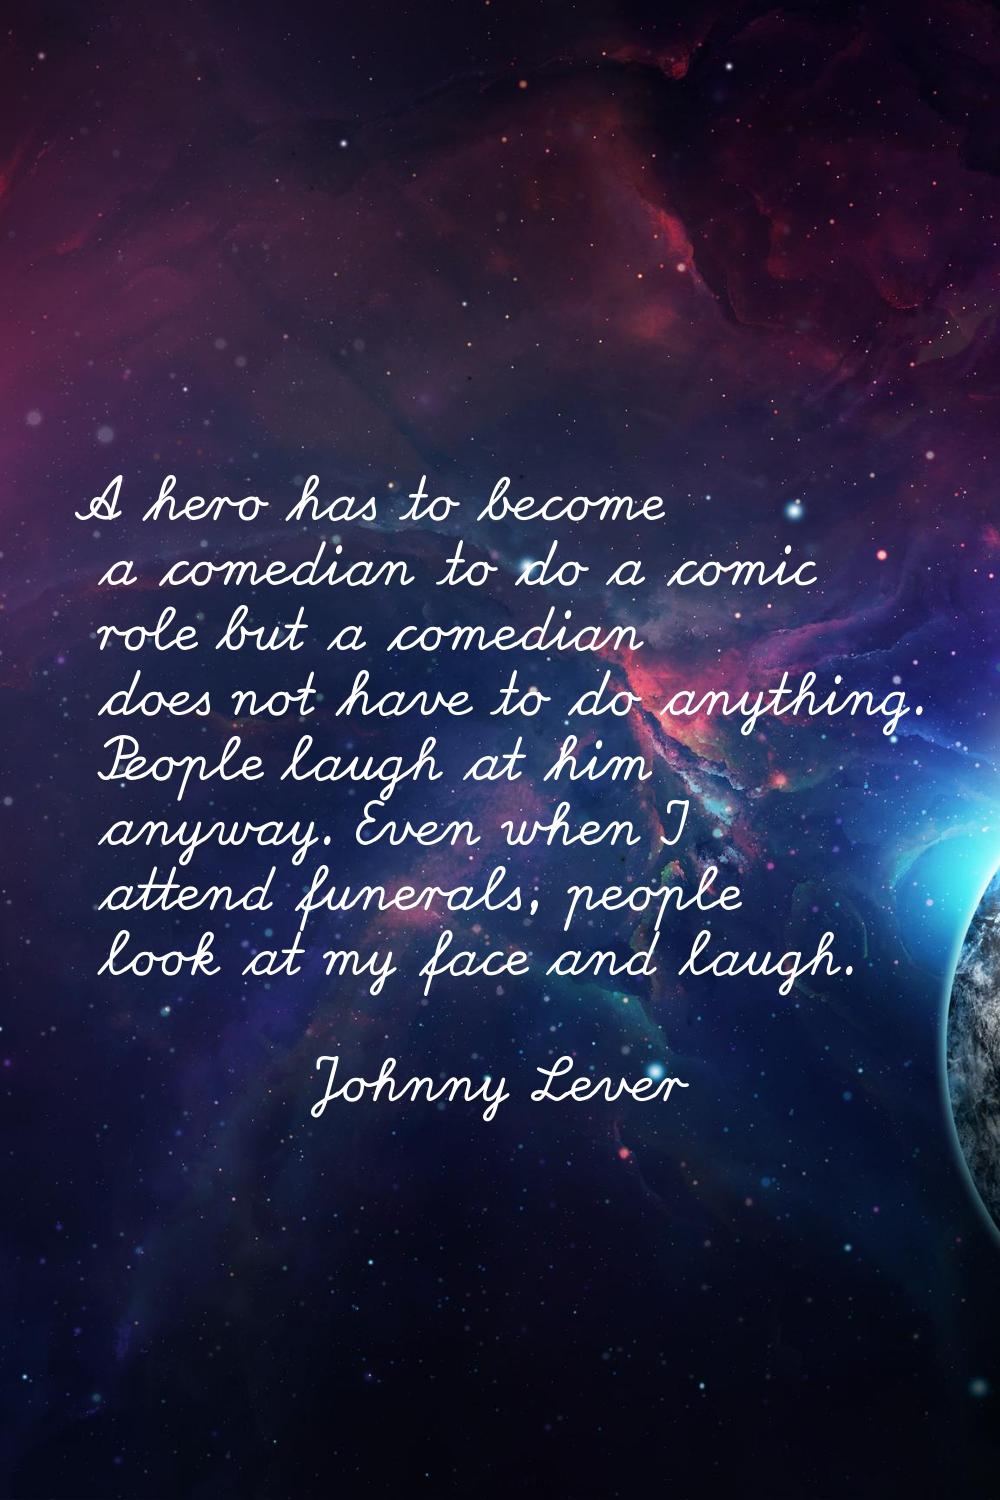 A hero has to become a comedian to do a comic role but a comedian does not have to do anything. Peo